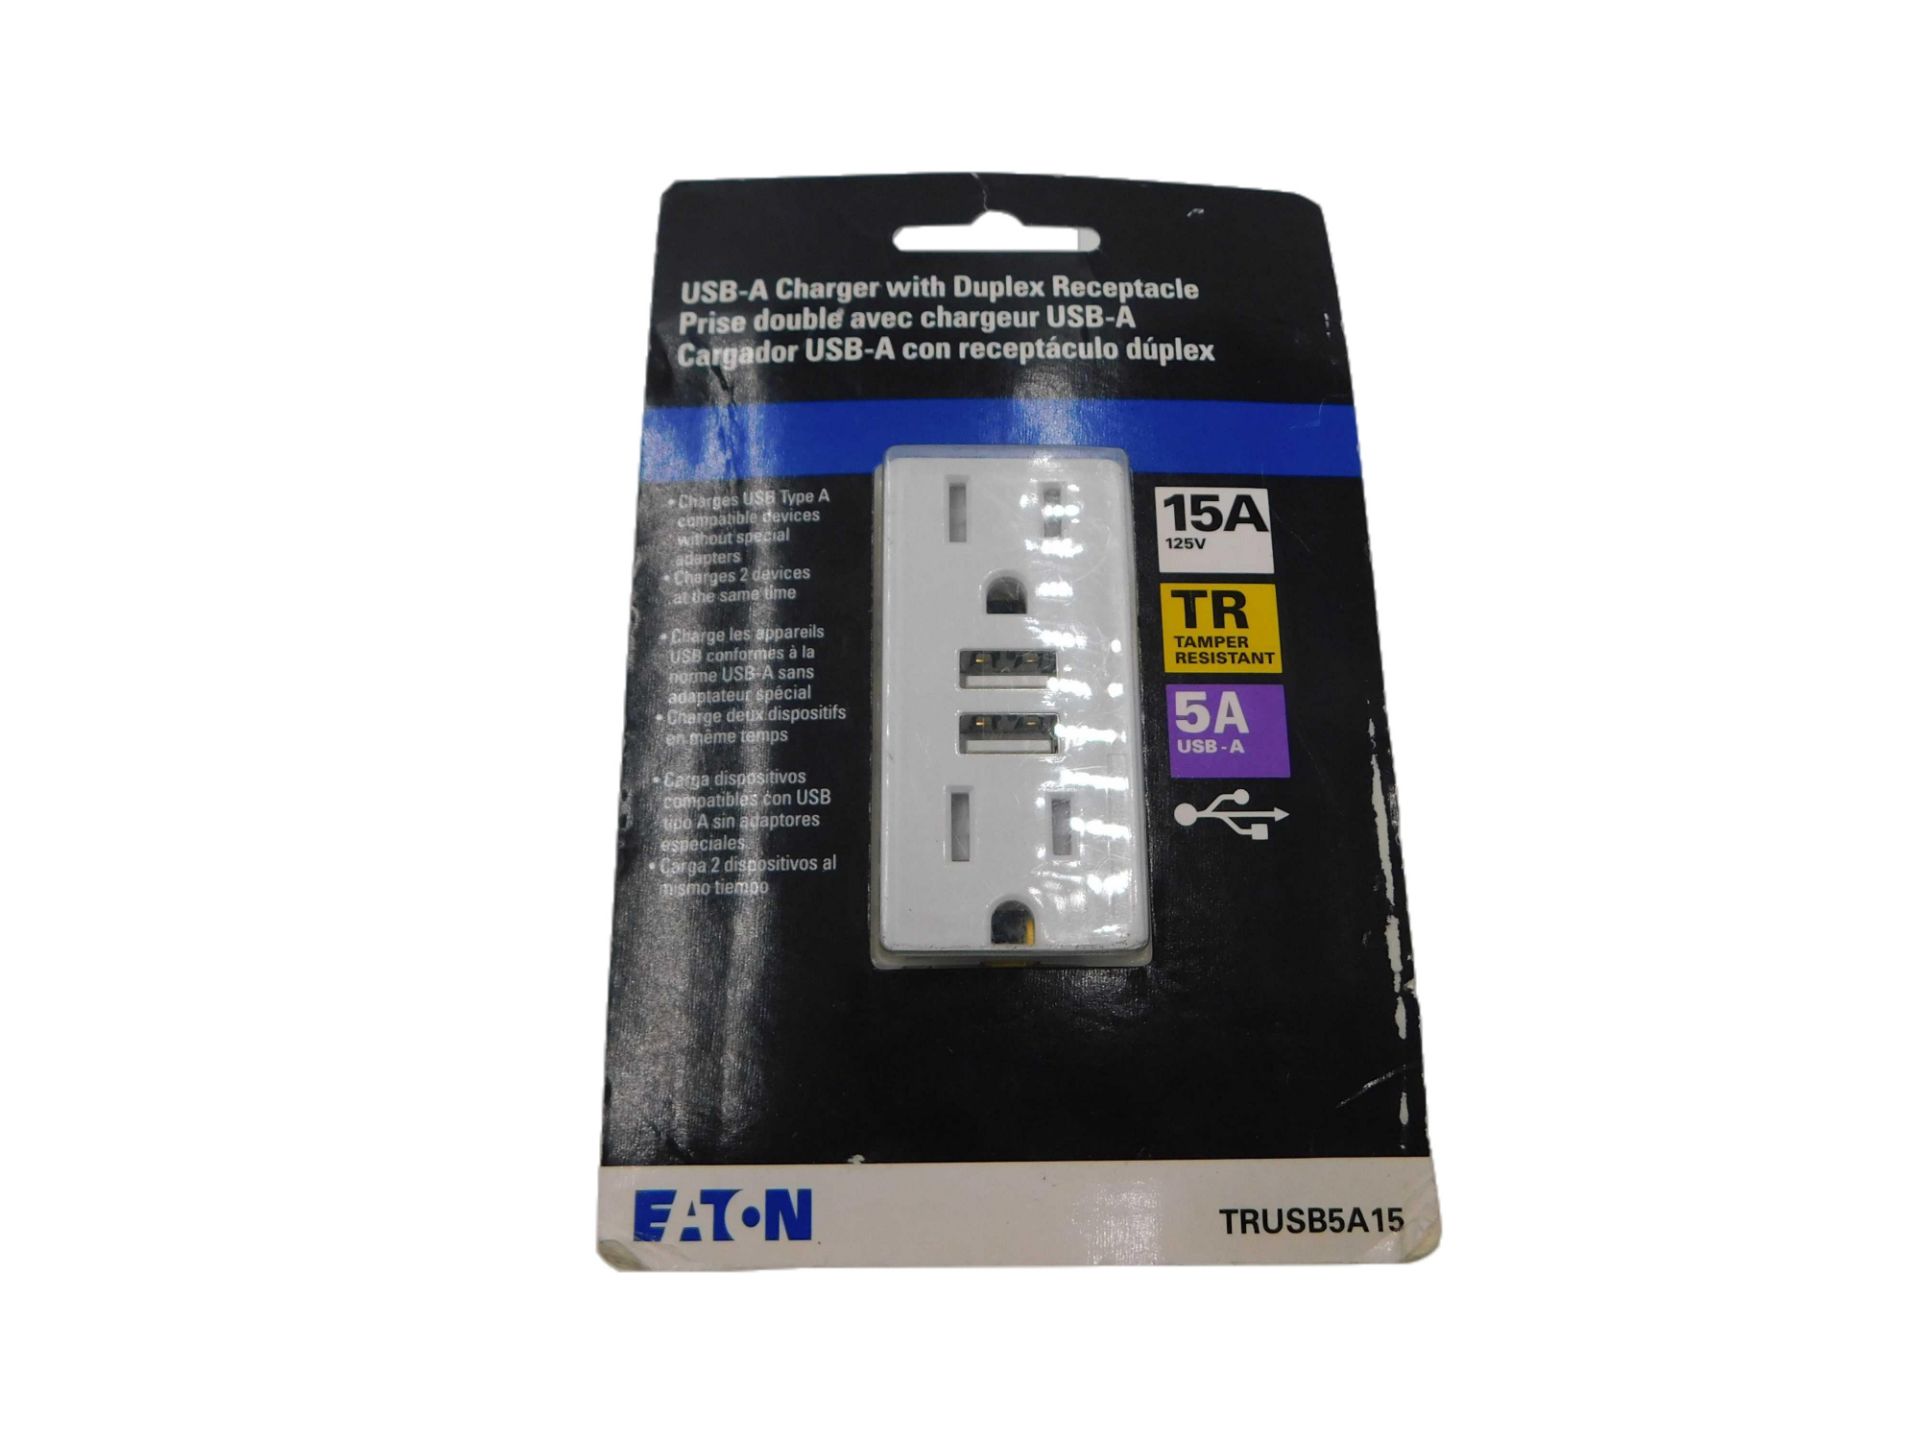 44x Eaton TRUSB5A15W-KB-LW Outlets Combination USB Charger/Duplex Receptacle 15A 125V White EA Tampe